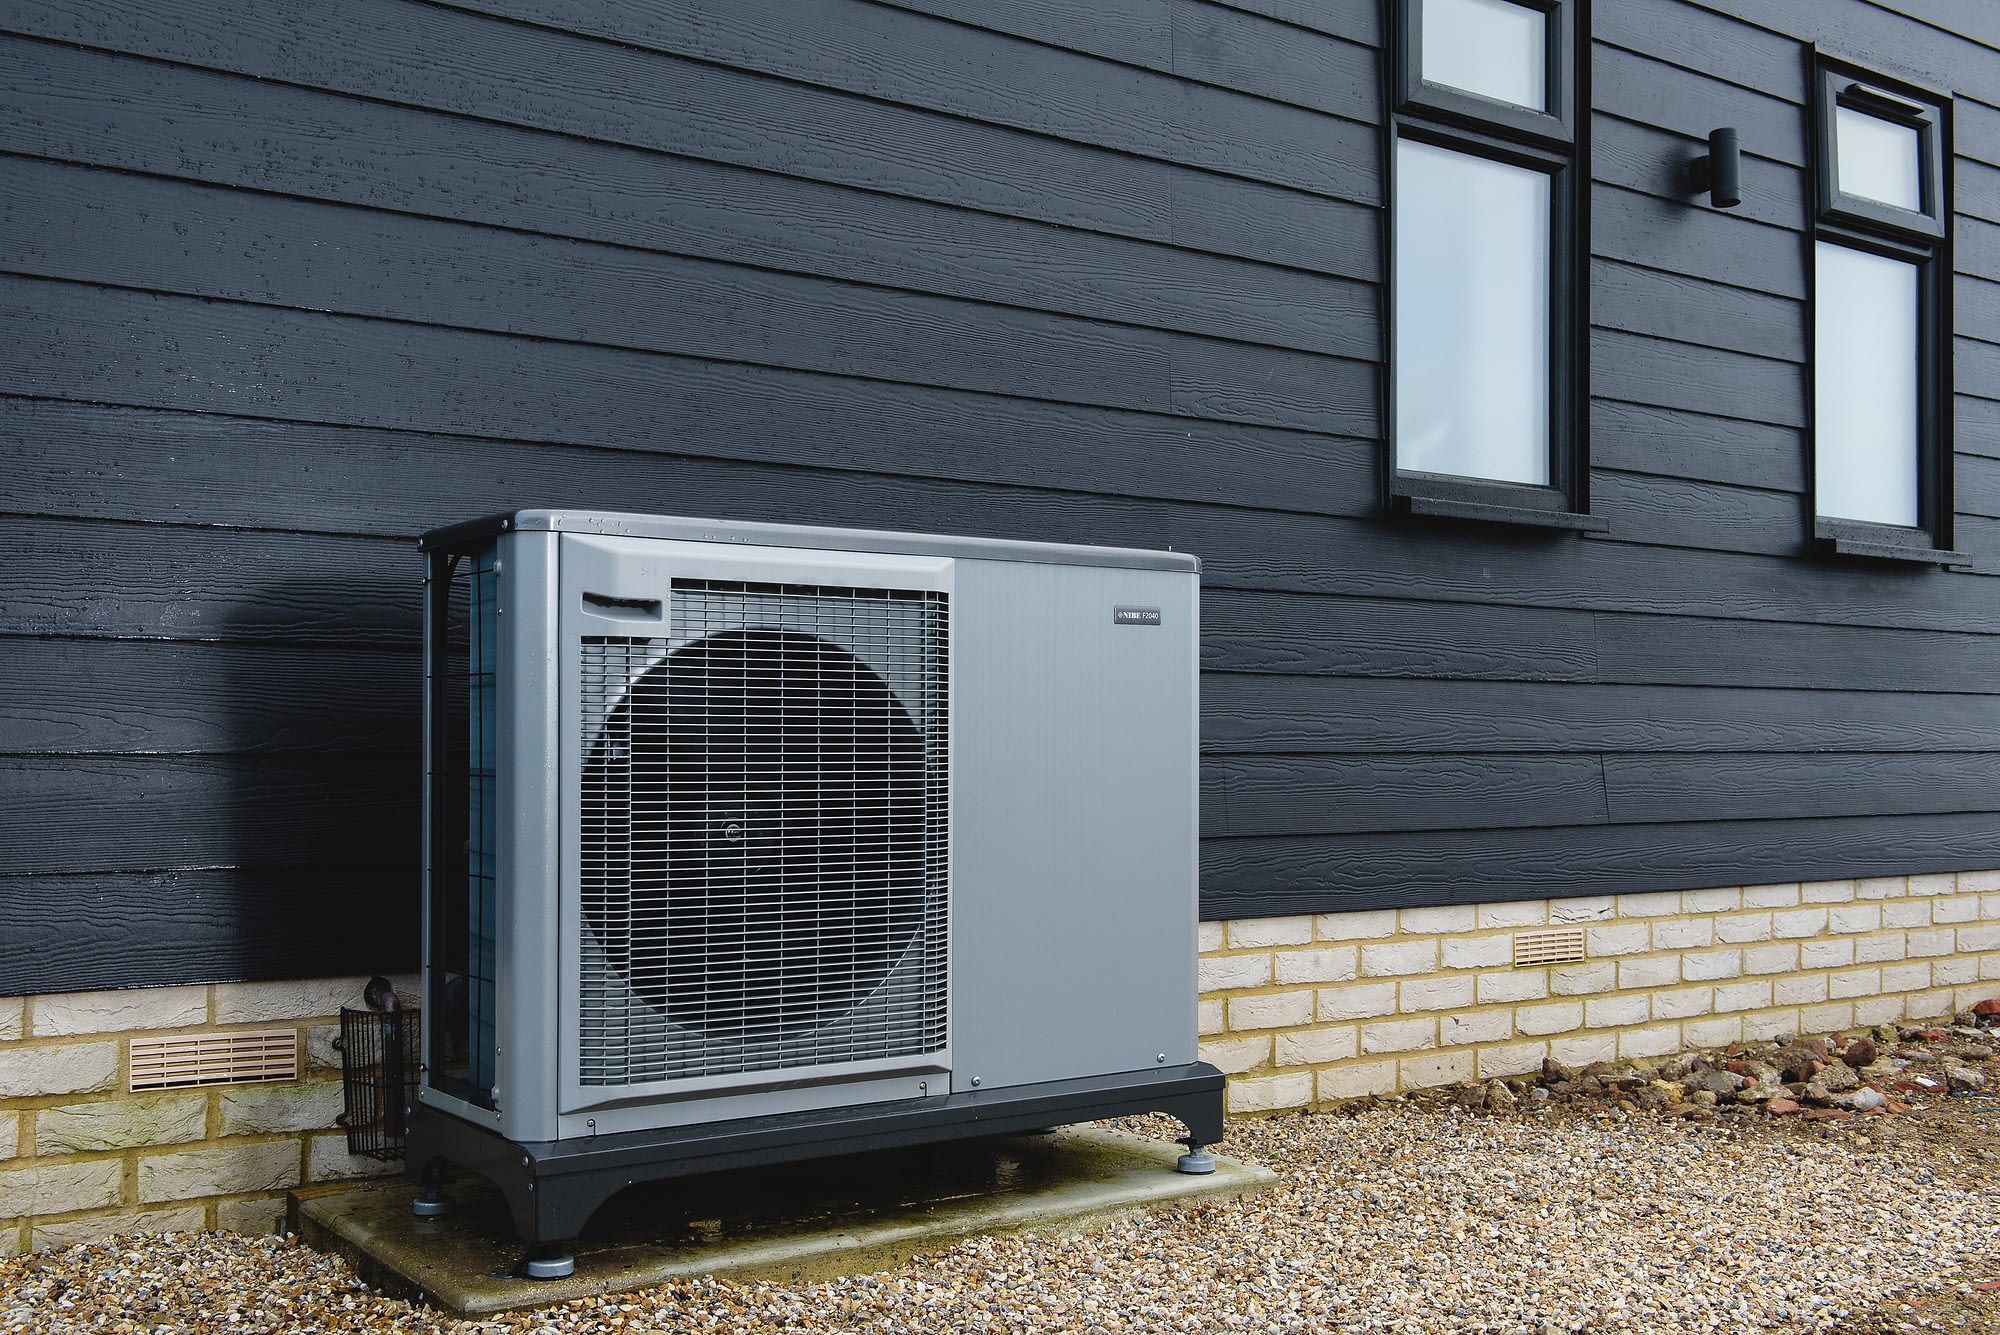 How To Effectively Use Heat Pumps?